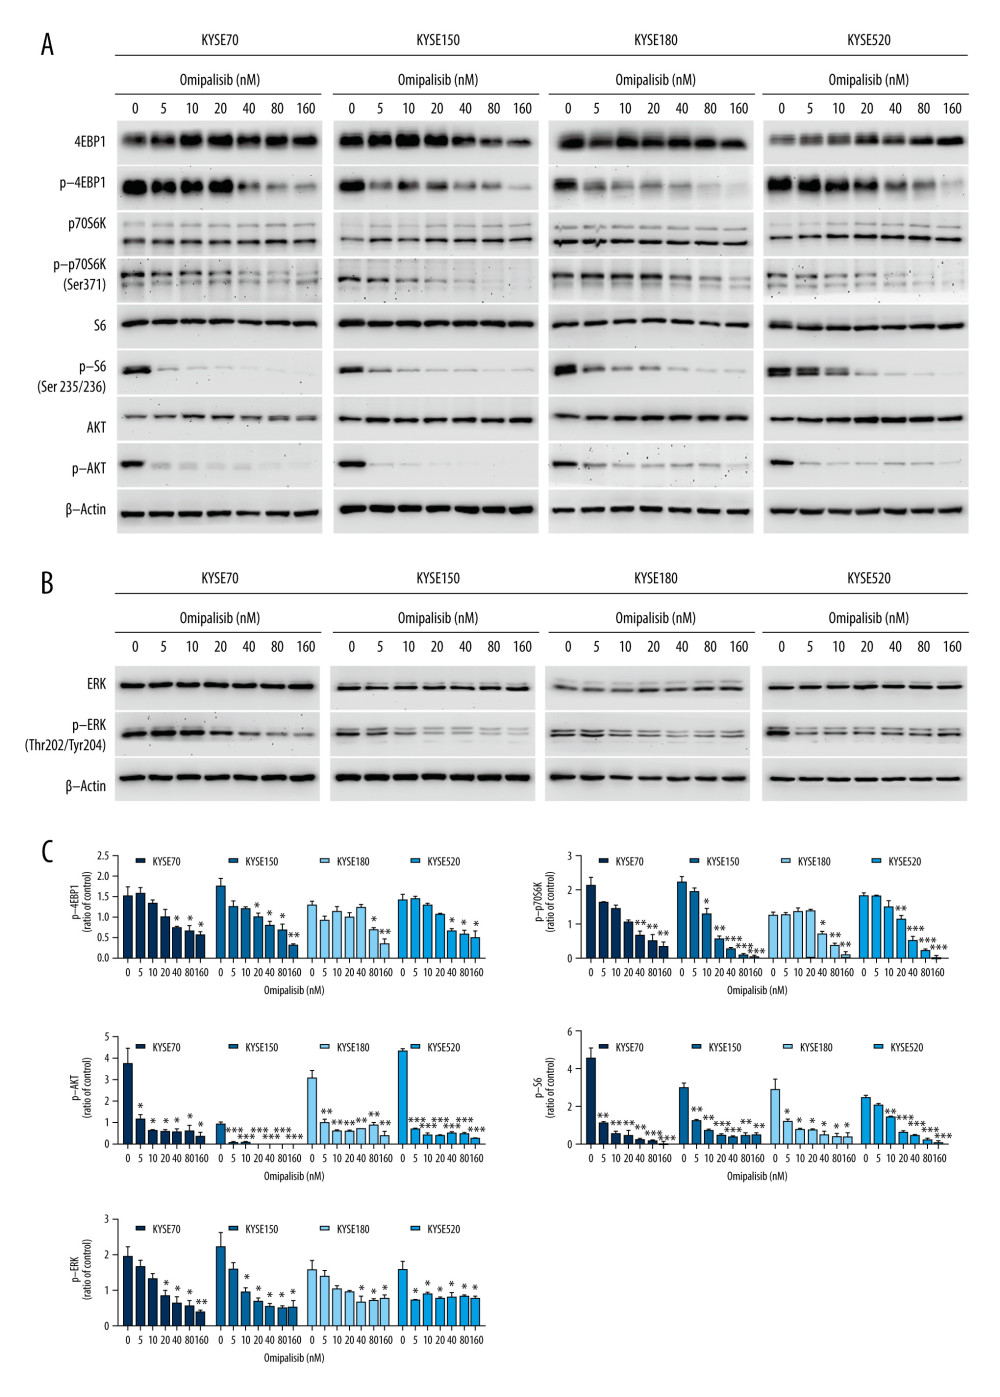 Omipalisib decreased phosphorylation of proteins in mTOR and ERK signaling pathway. (A) Esophageal squamous cell carcinoma (ESCC) cells were treated with the various concentrations of omipalisib for 24 hours. The protein expression levels of 4EBP1, p-4EBP1, p70S6K, p-p70S6k, S6, p-S6, AKT, and p-AKT were identified by Western blot analysis. (B) ERK and p-ERK protein levels in the 4 ESCC cell lines treated with omipalisib at the indicated concentrations for 24 hours. (C) Density analysis of protein bands performed with ImageJ software. Plot is the average of 3 independent experiments. (* P<0.05, ** P<0.01, *** P<0.001).